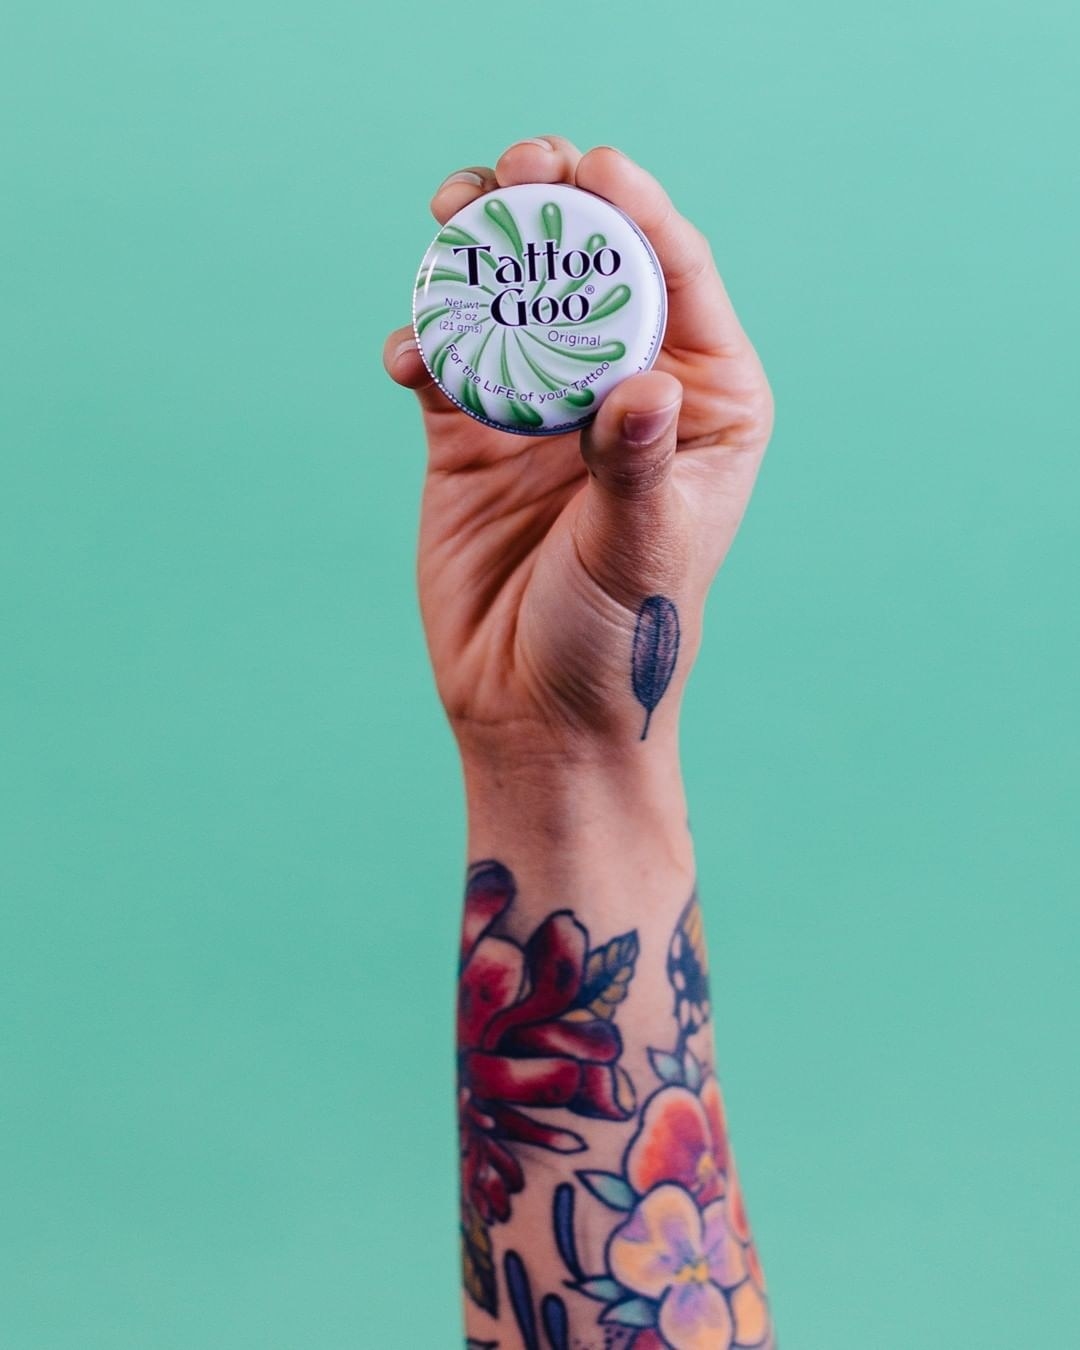 A tattooed hand holds up a tin of the tattoo goo